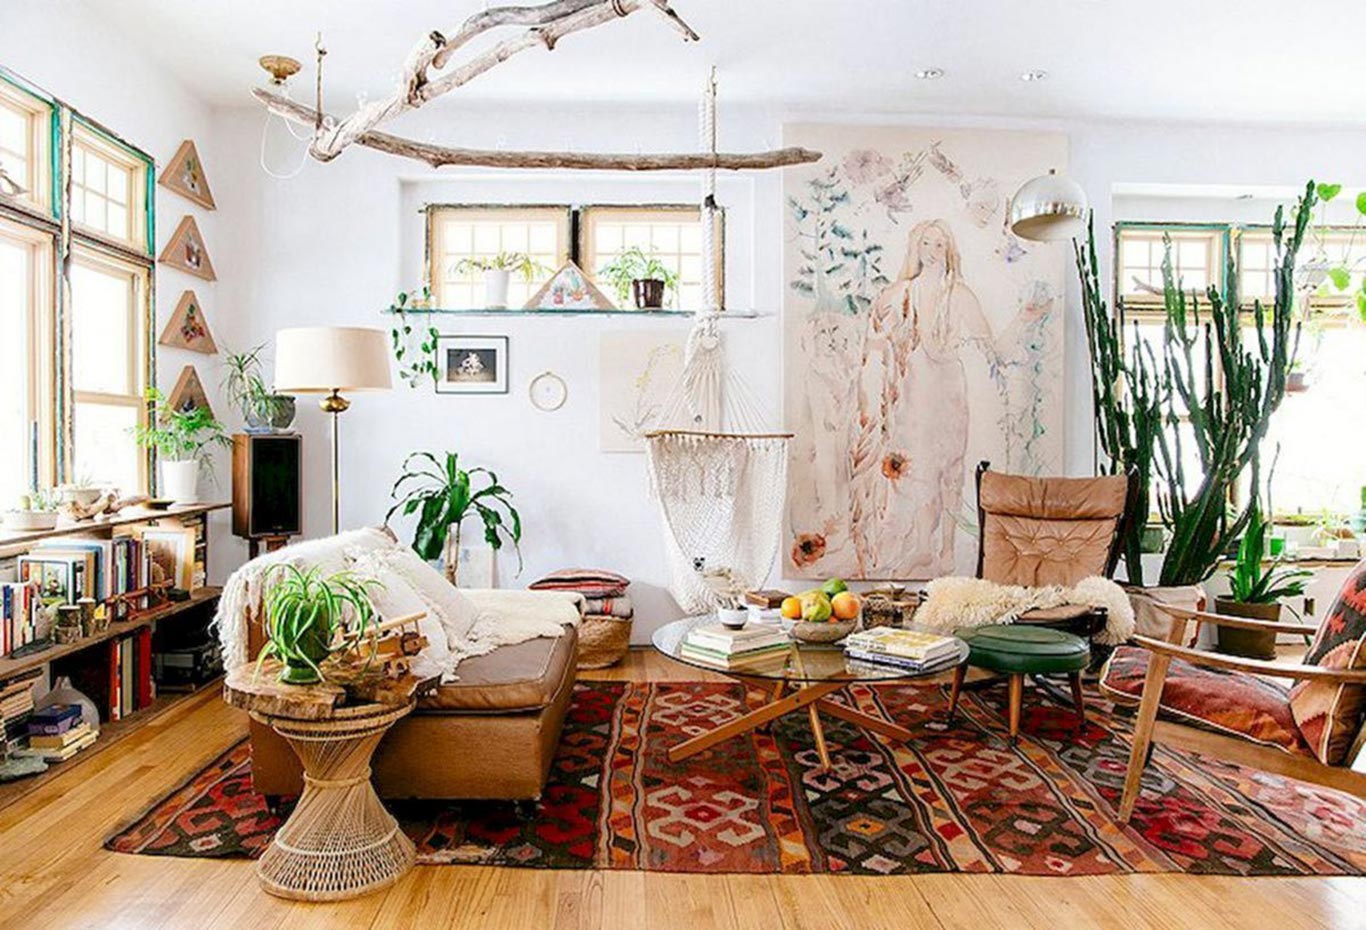 Color a boho space with fresh or dried plants.